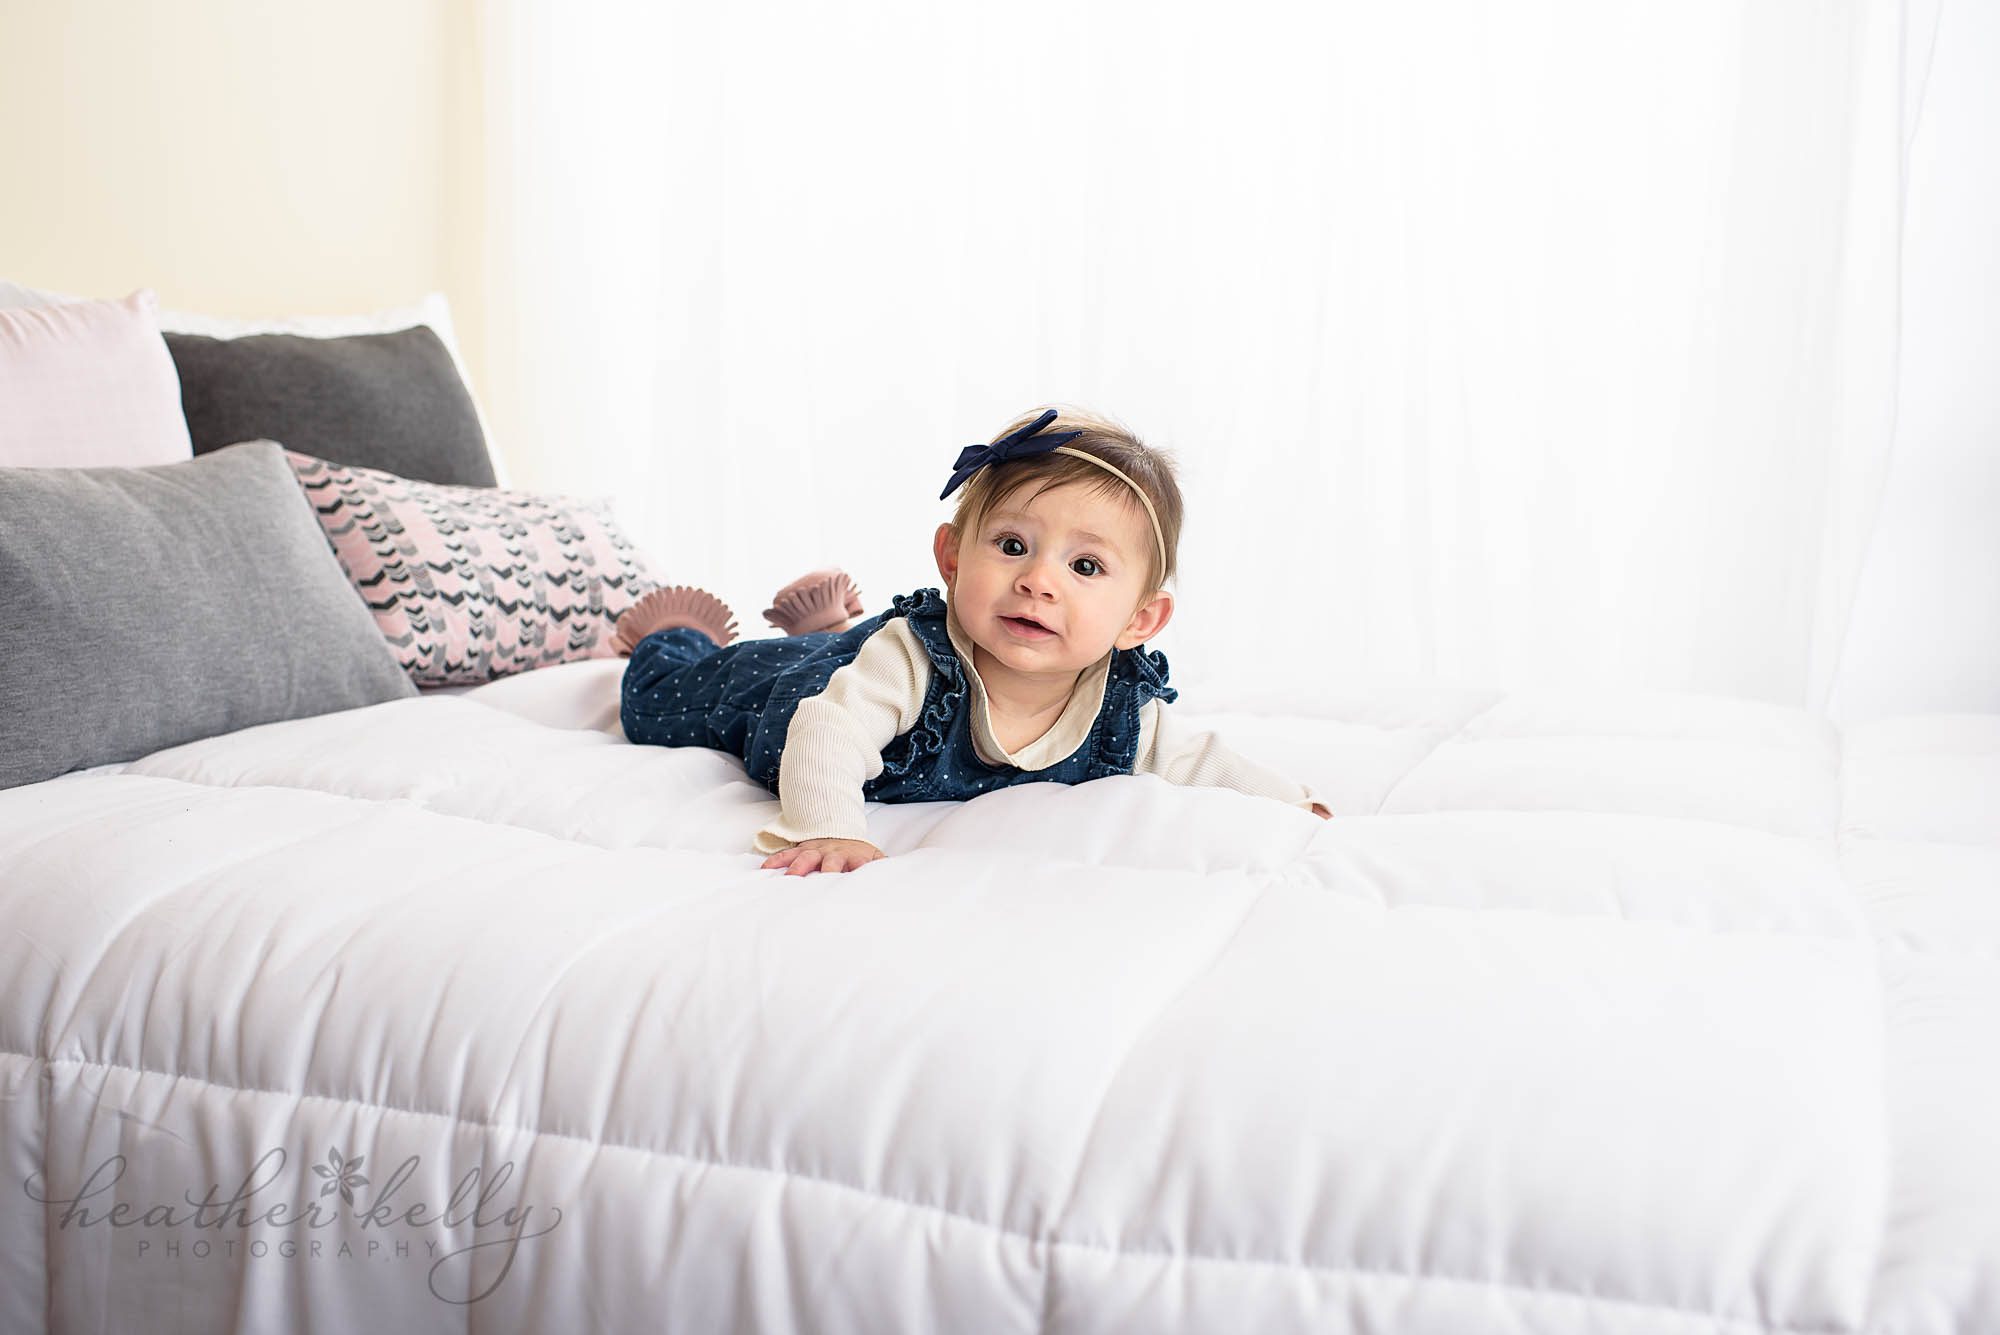 6 month baby photography. backlit bed. monroe baby photography